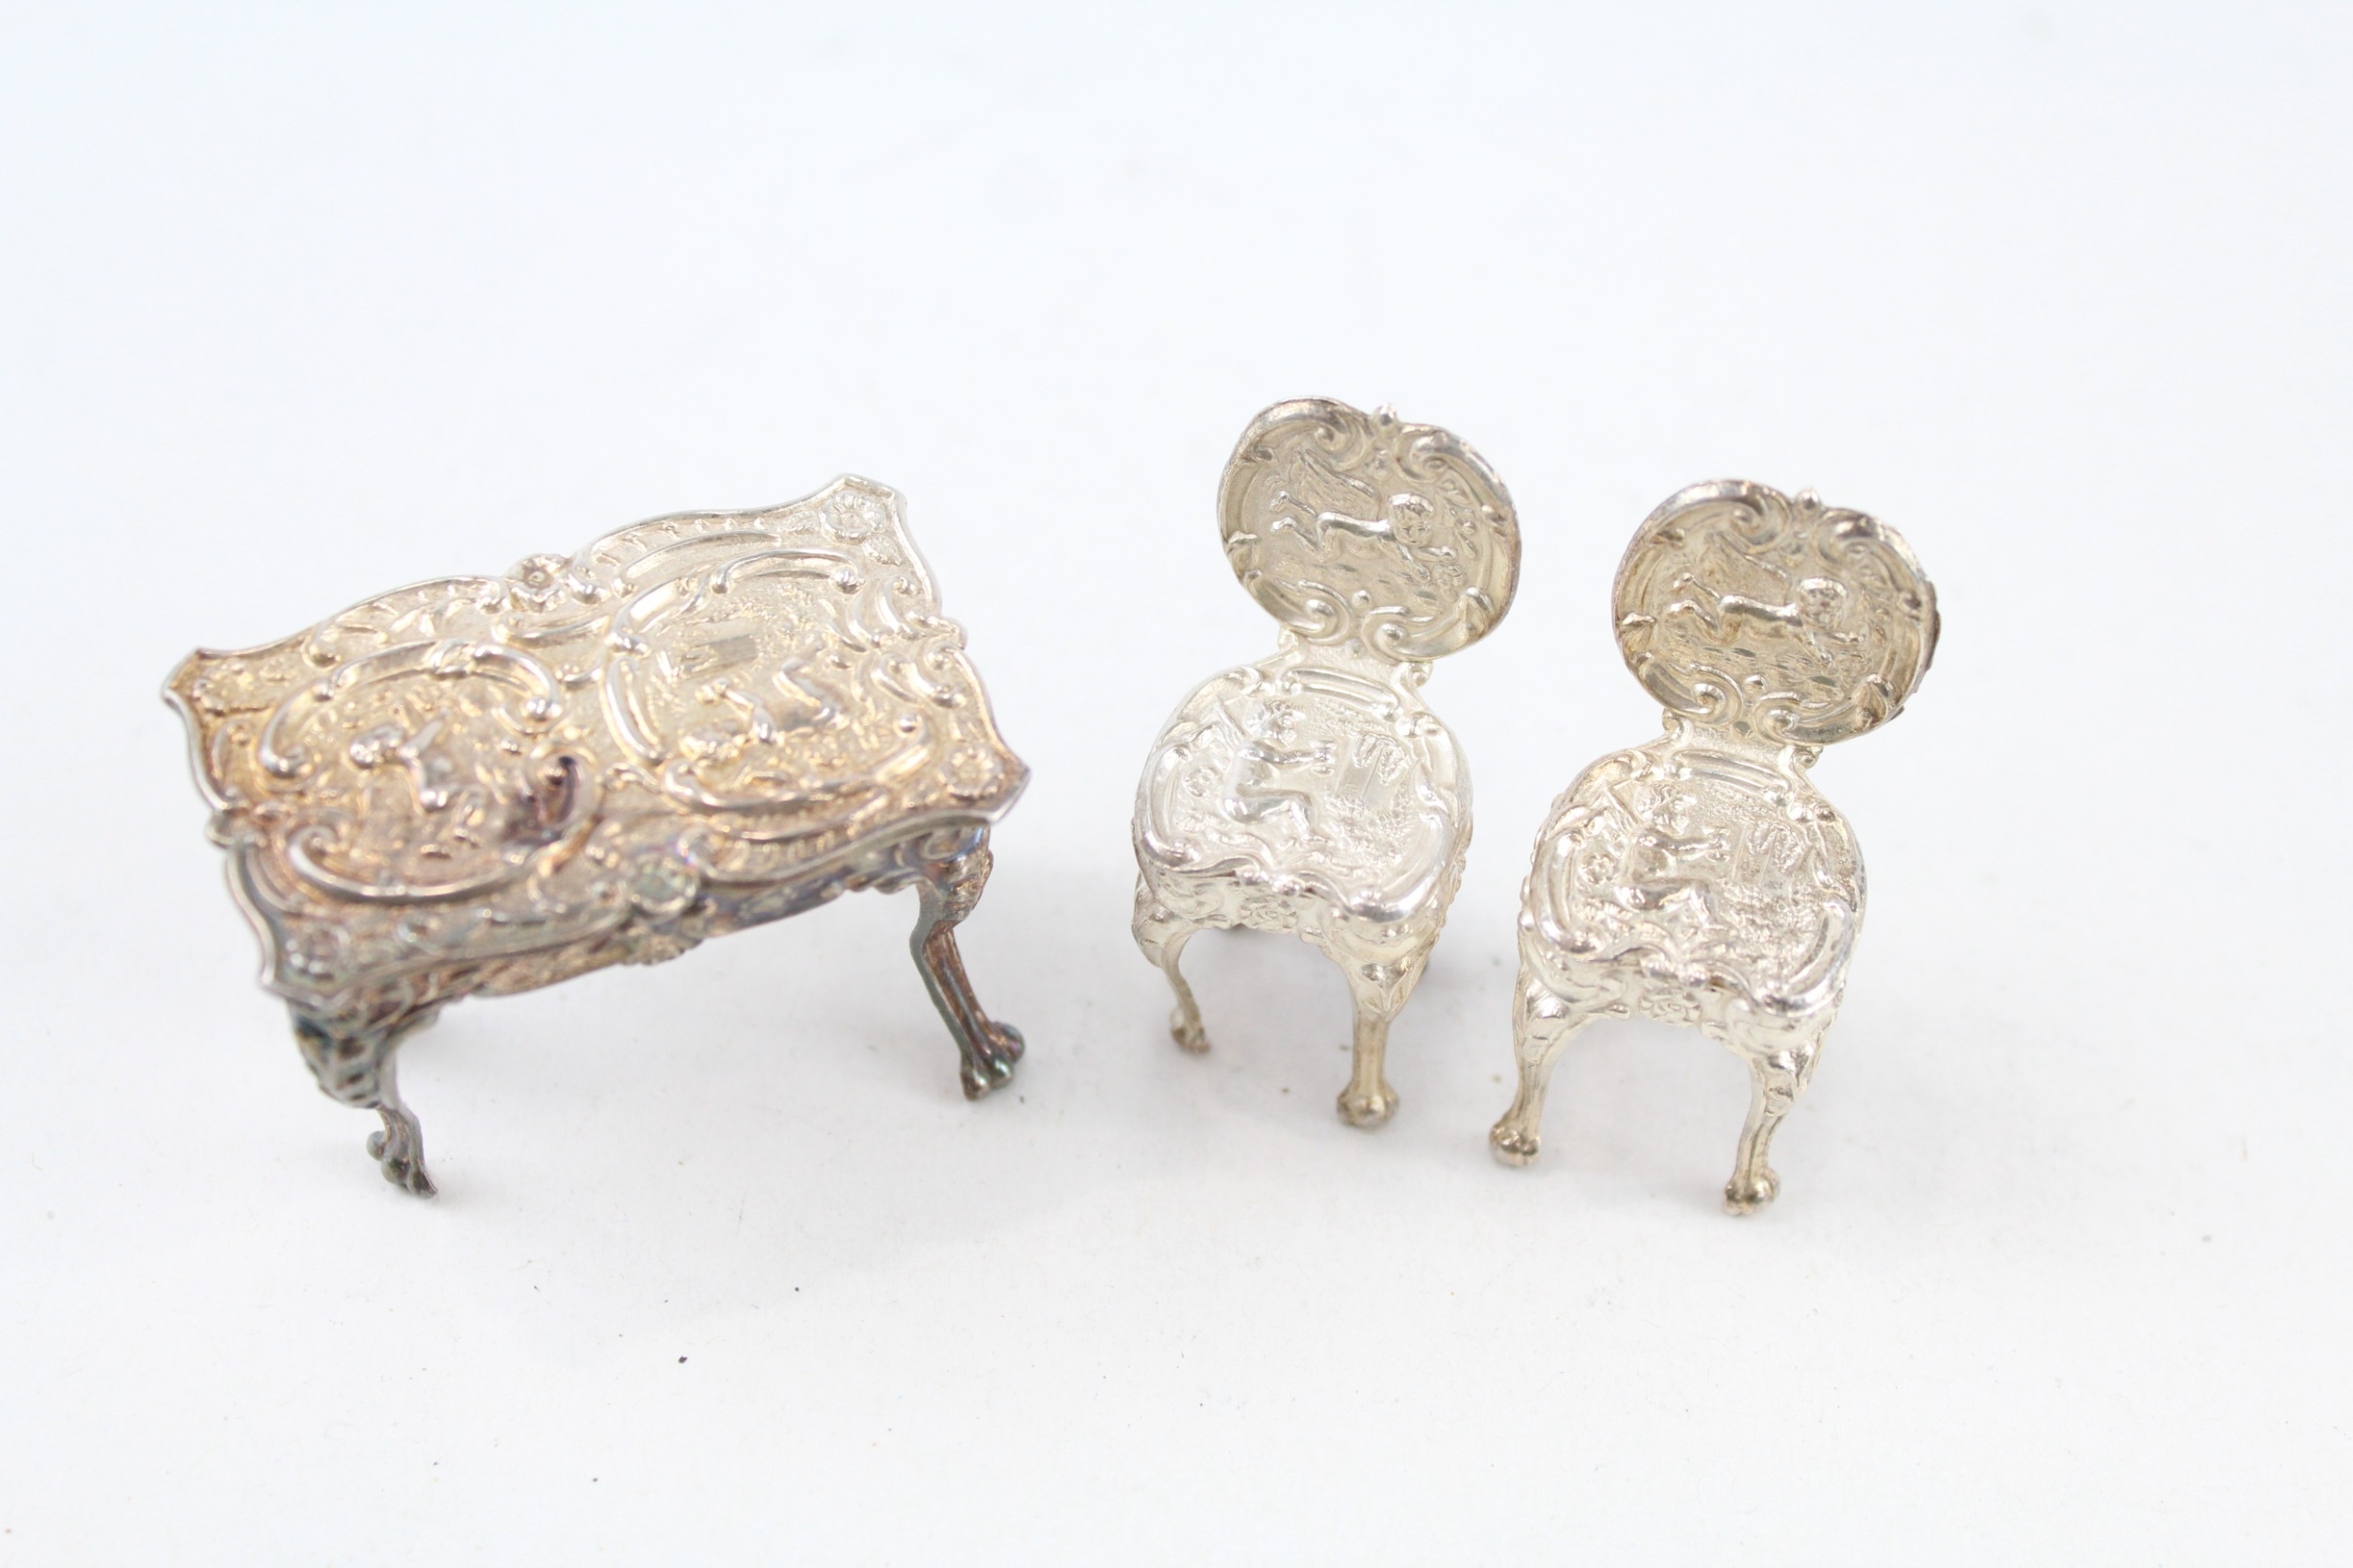 3 x Vintage .925 STERLING SILVER Doll's House Minature Table & Chairs (27g)